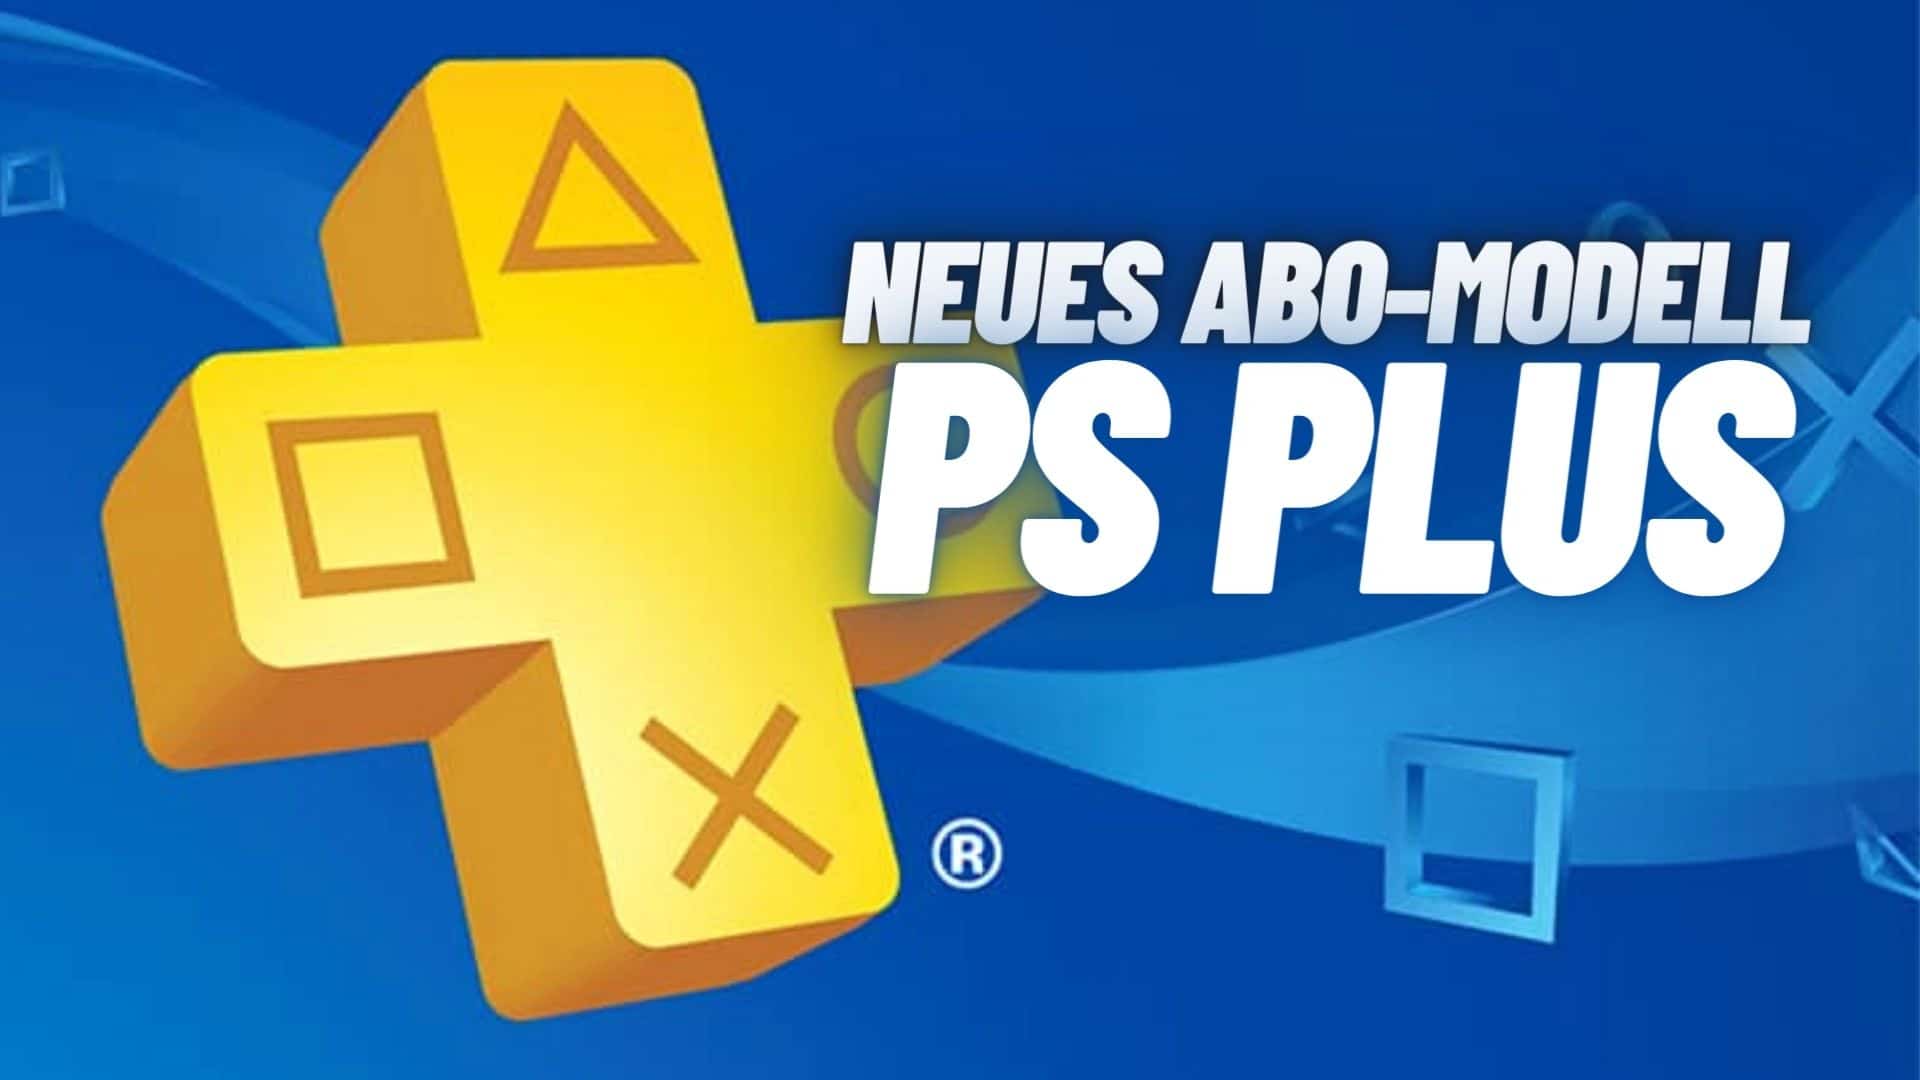 Next week your subscription to PS Plus will change completely - you should know that now on PS4 & PS5